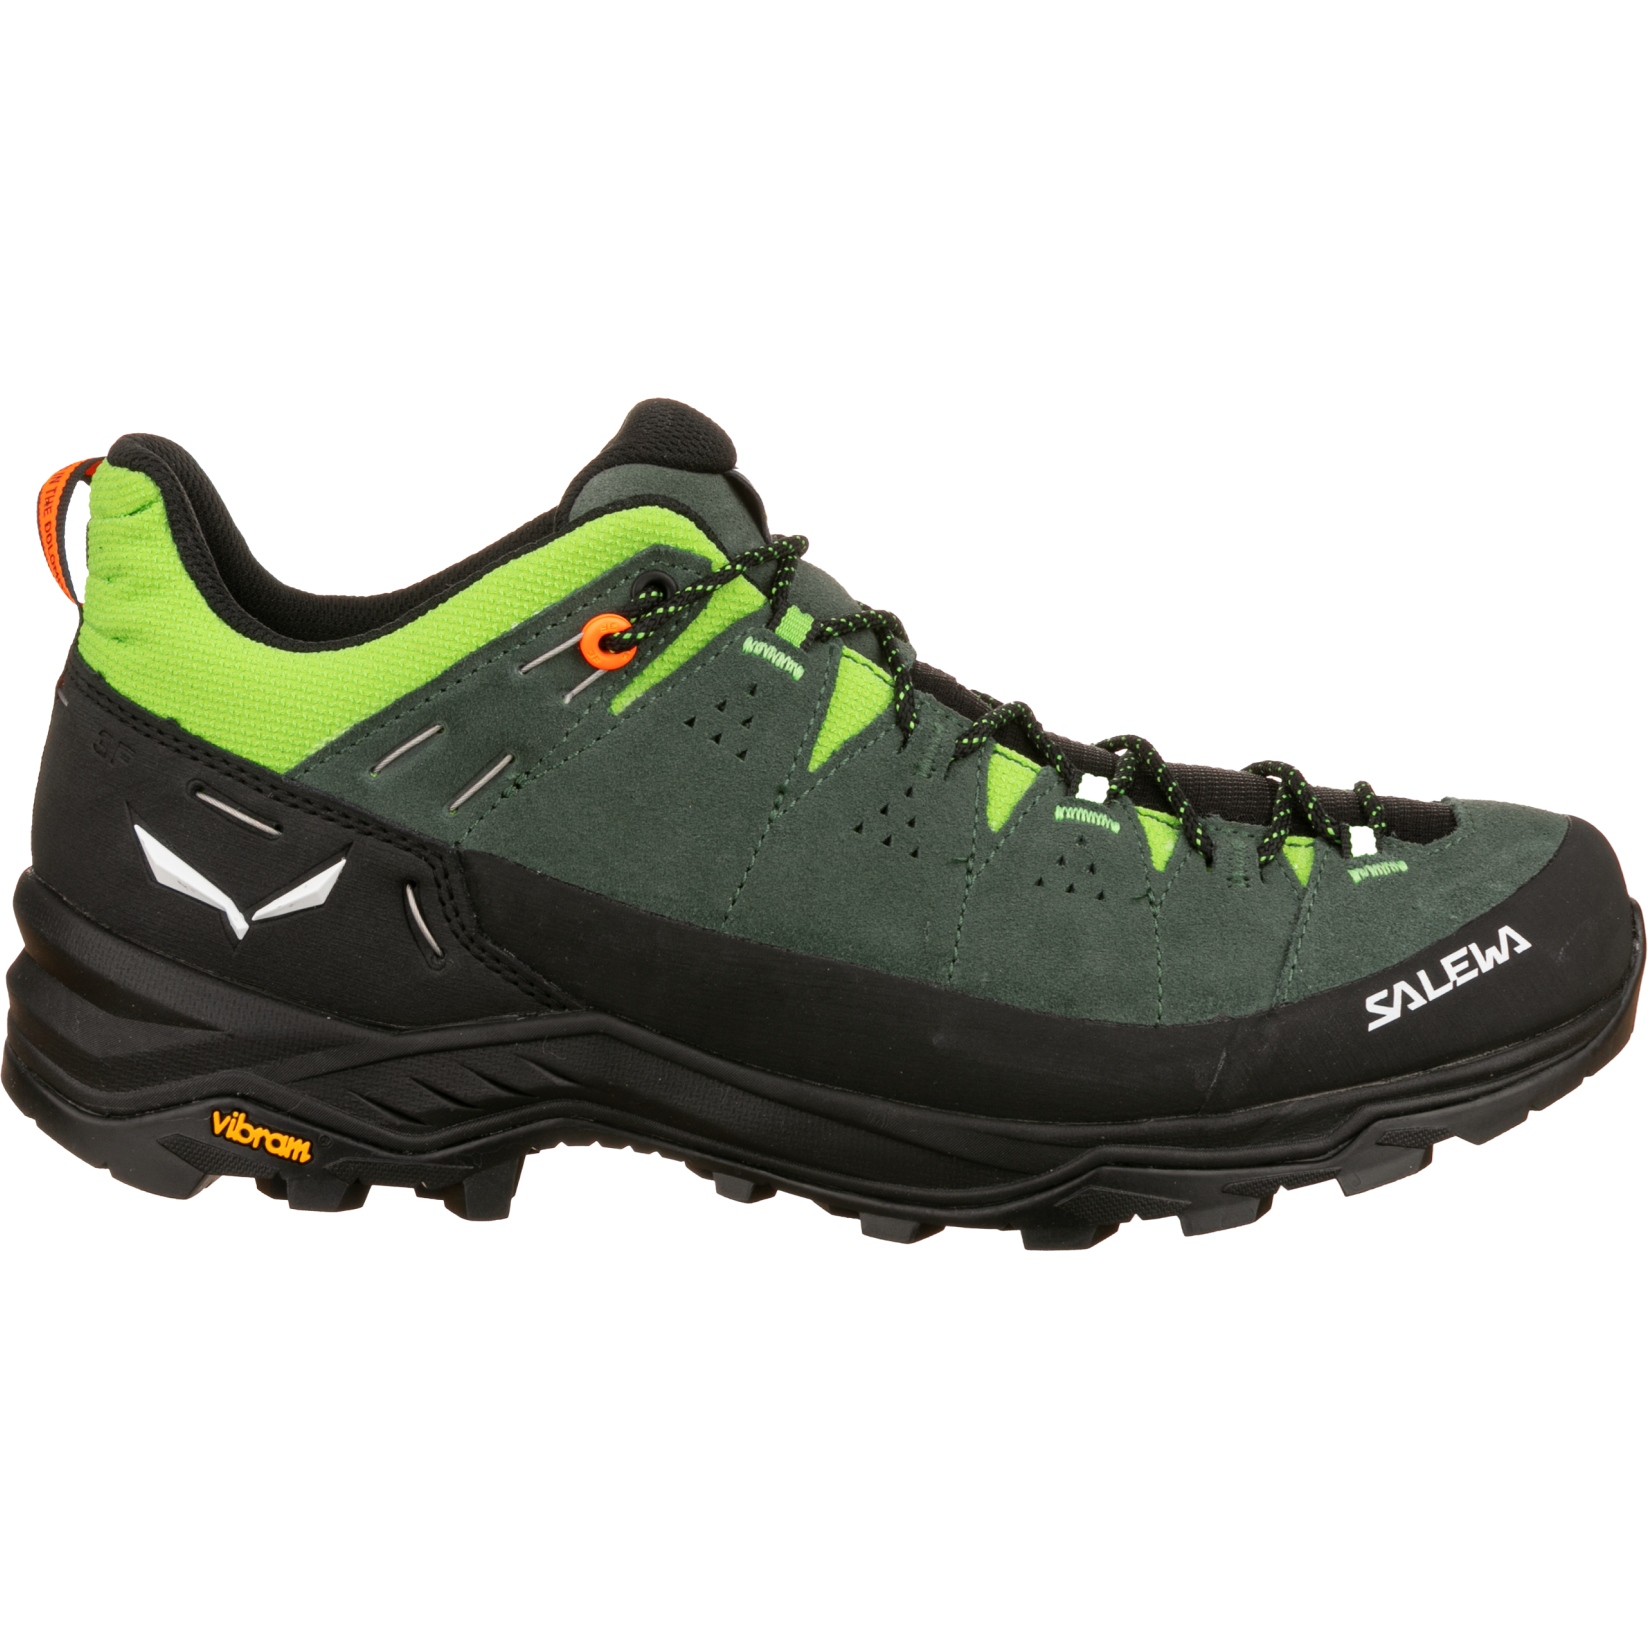 Picture of Salewa Alp Trainer 2 Hiking Shoes - raw green/black 5331